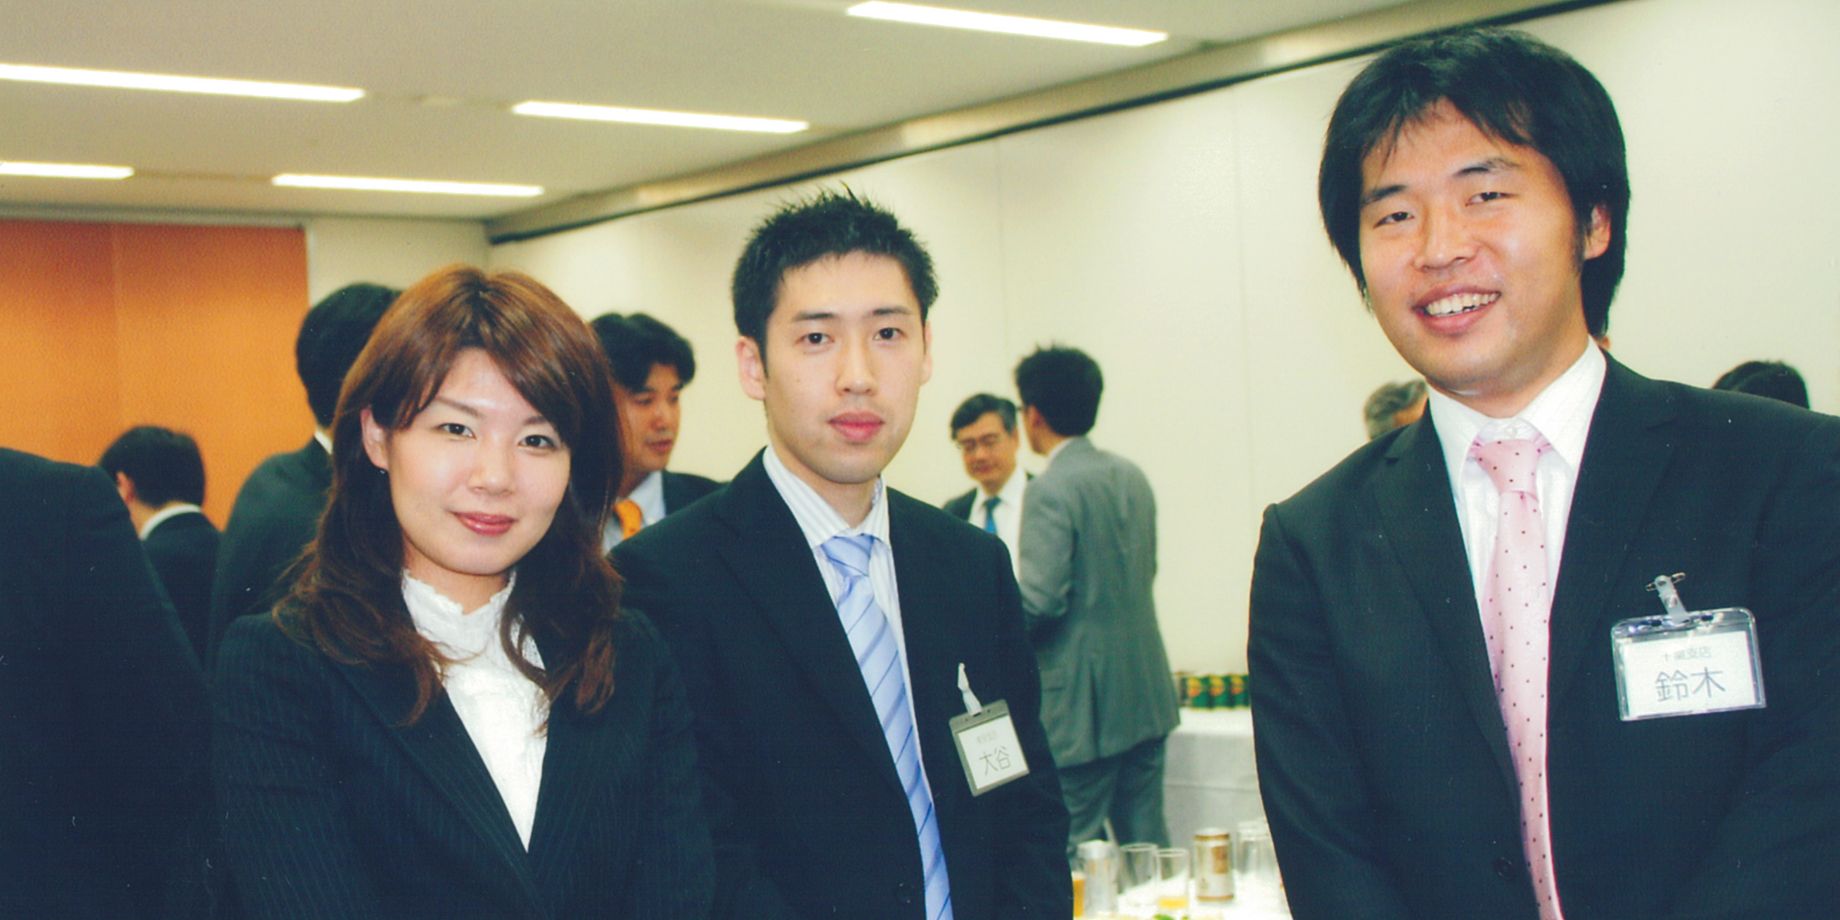 Receiving award for outstanding job performance at pre-merger Tokyo Leasing